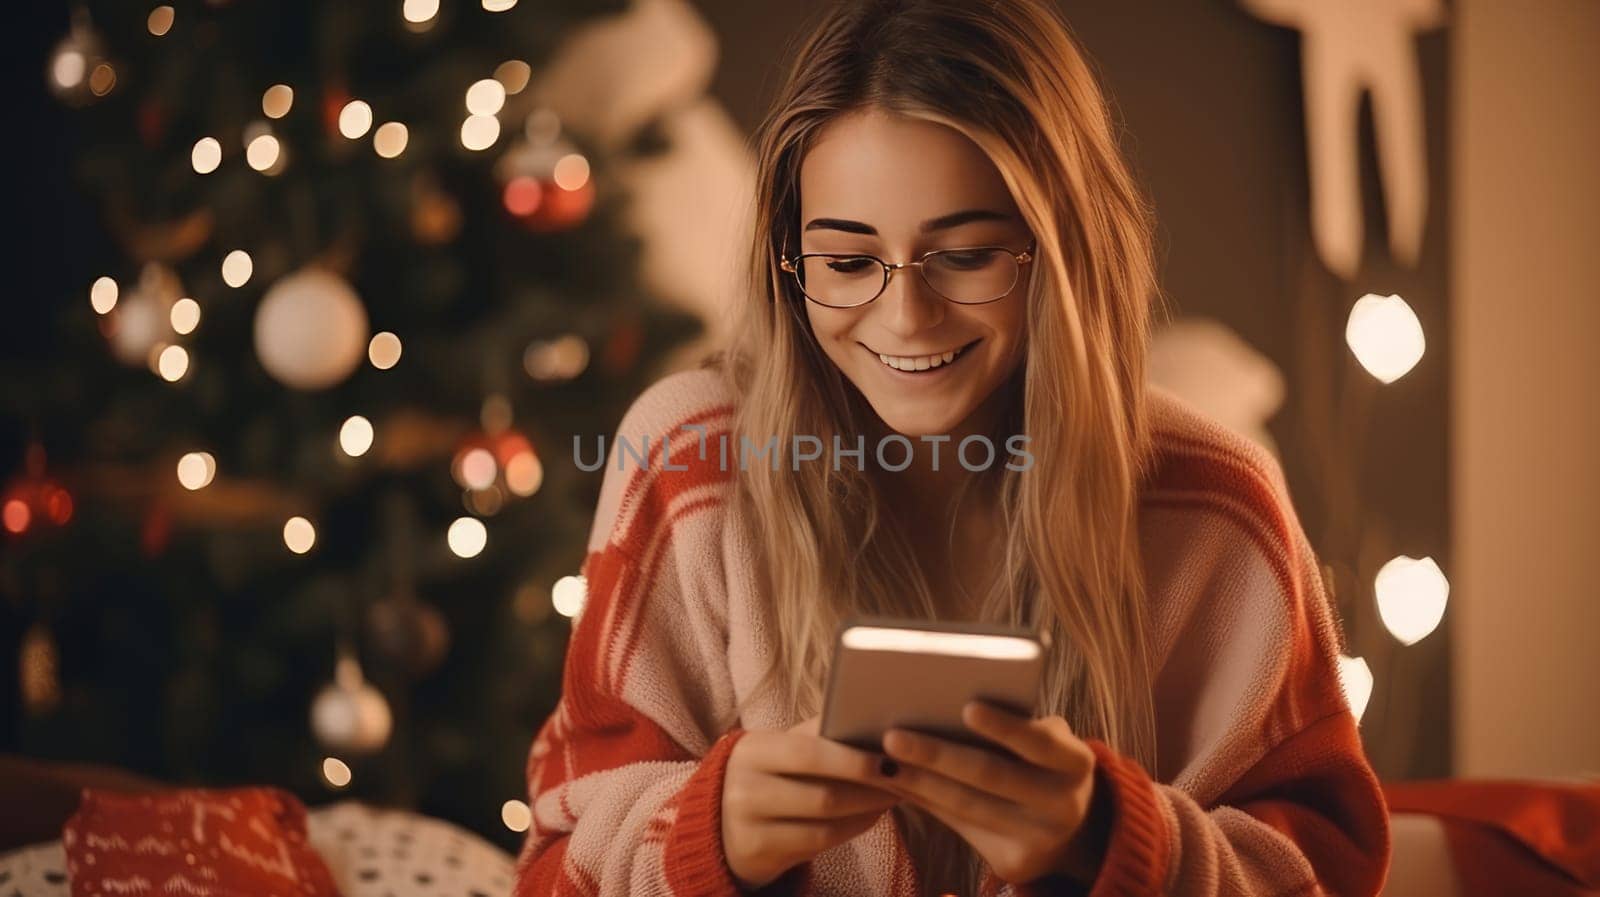 Young woman in pajamas in bed orders New Year's gifts during Christmas holidays at home using smartphone and credit card.